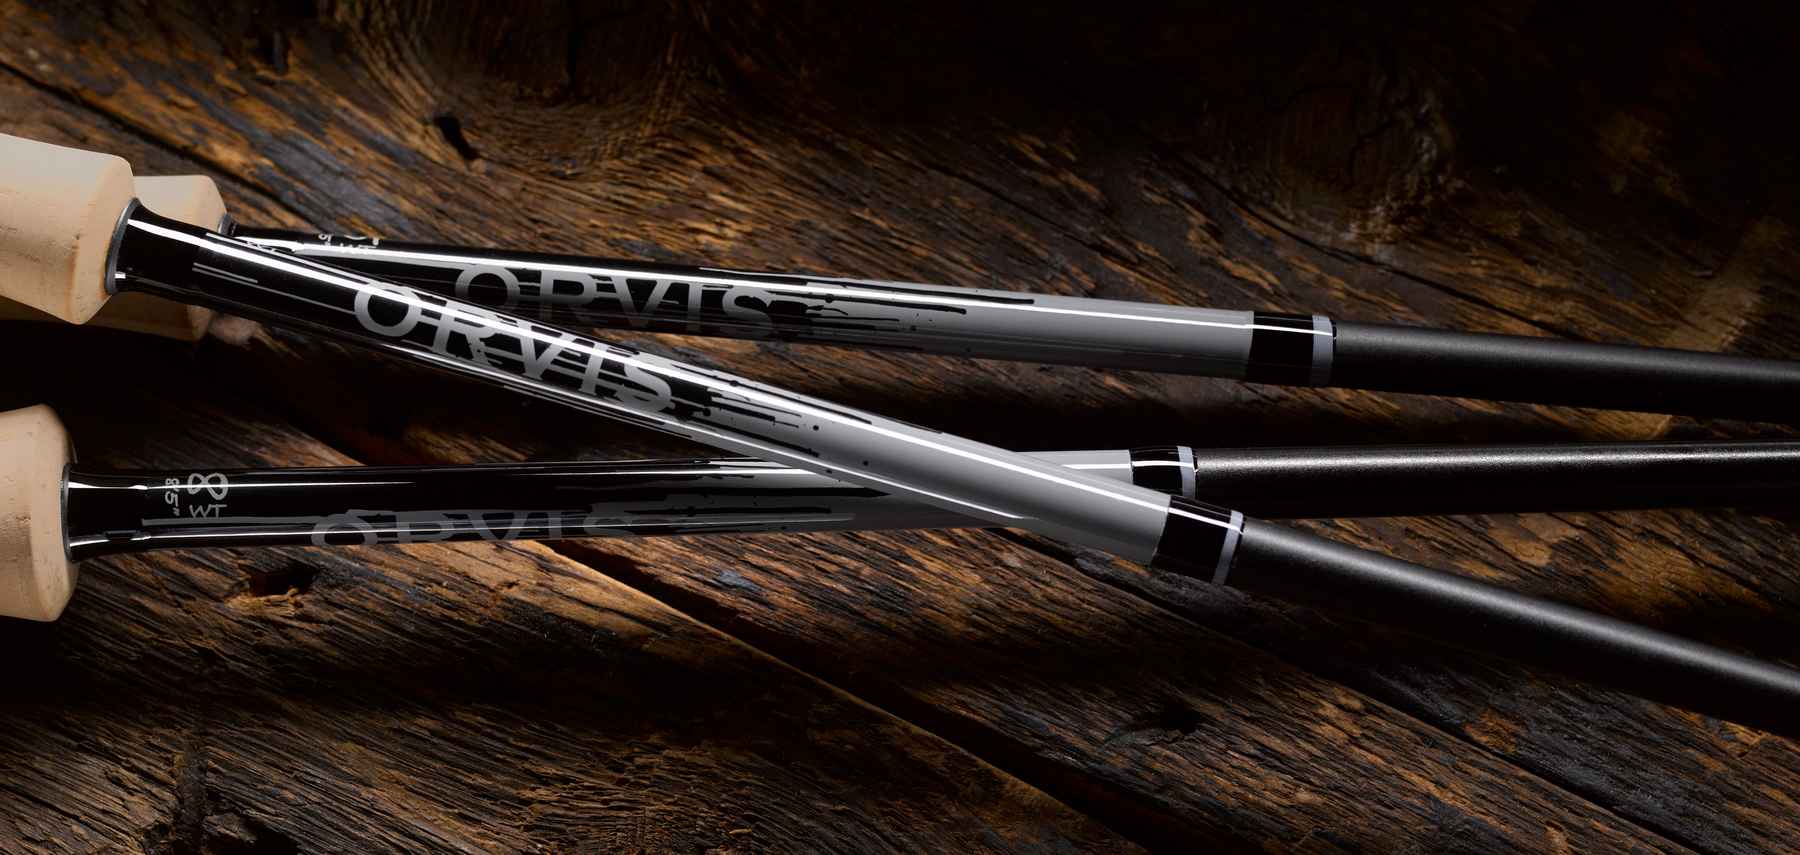 Orvis introduces new Helios 3 'Blackout' fly rods